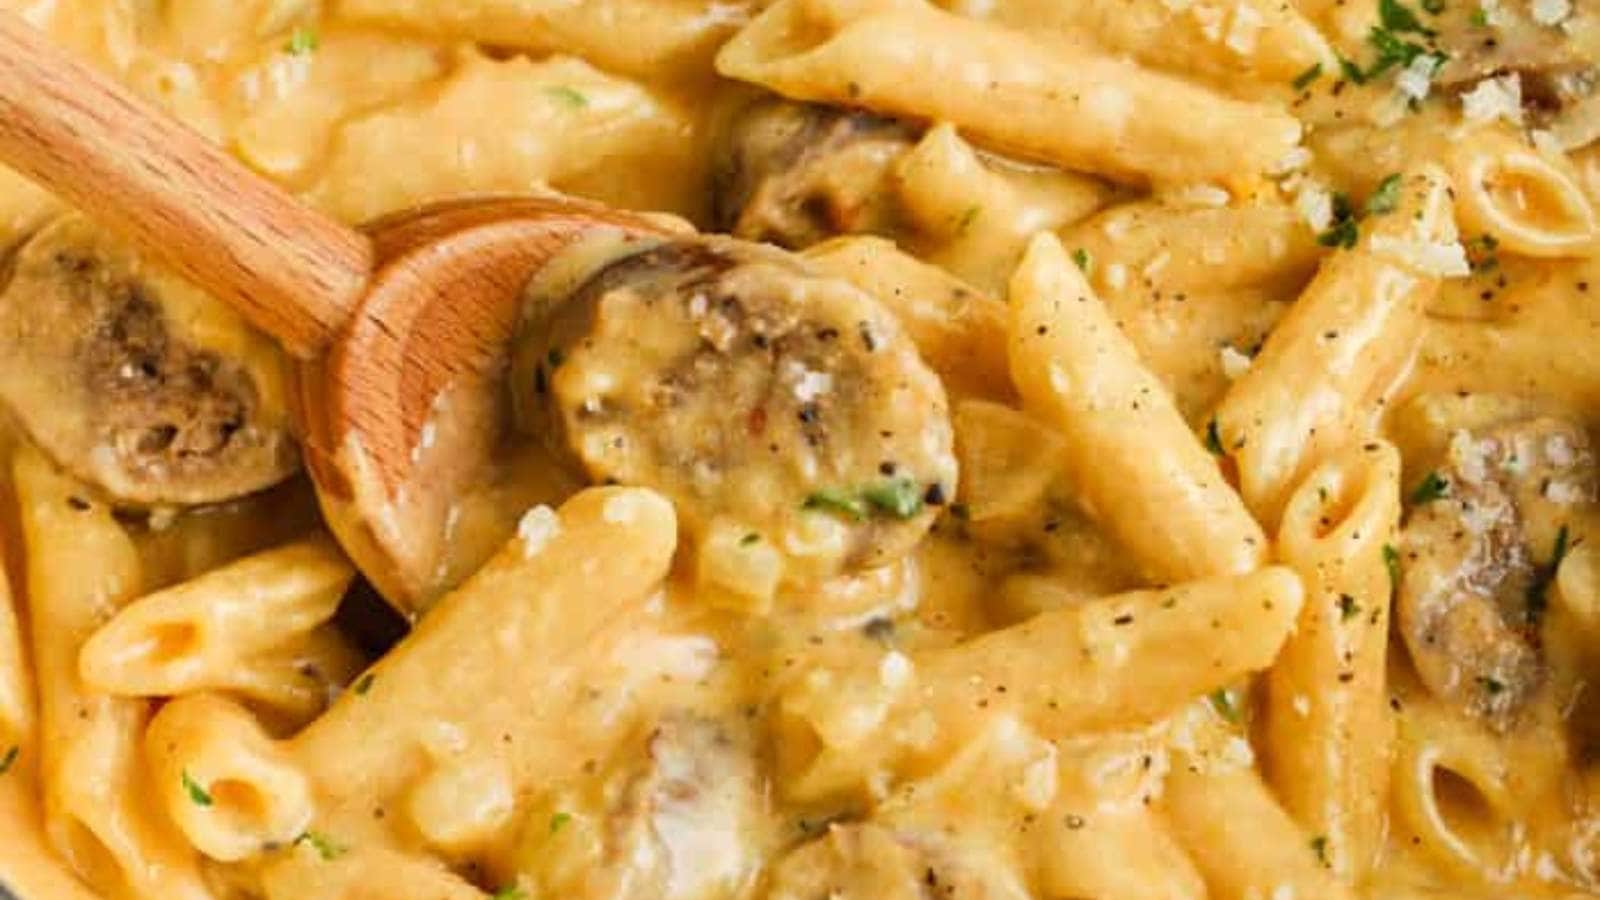 Cheesy Sausage Pasta recipe by Spend With Pennies.